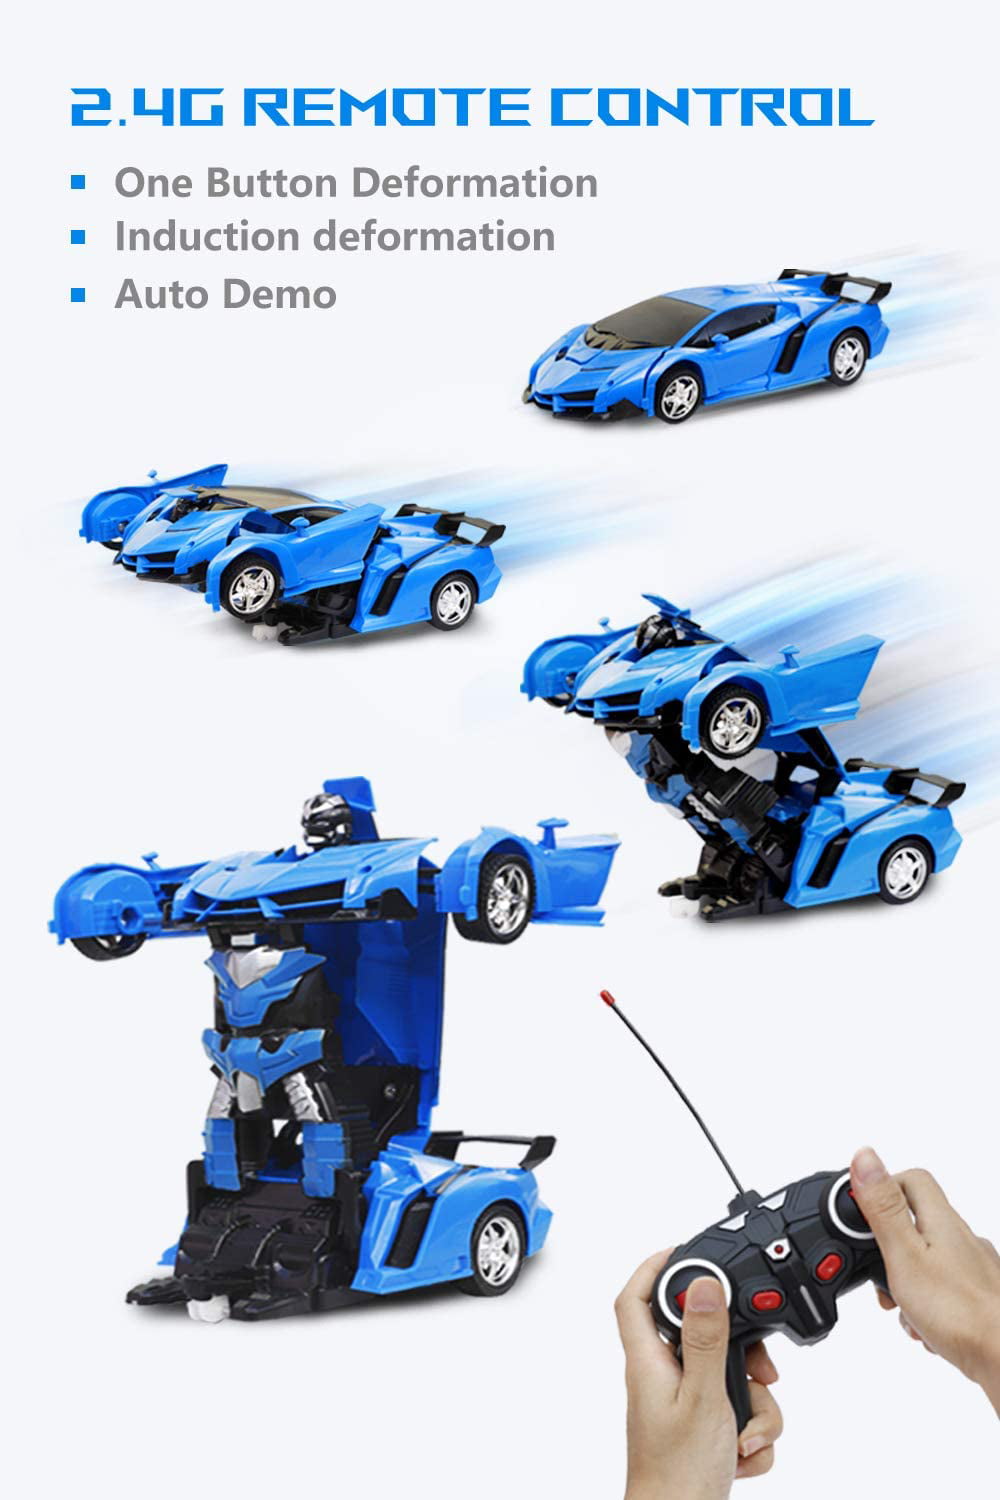 ameow Remote Control Car Transform Robot Gesture Sensing Toys, RC Cars Robot for Kids Best Gift for Boys and Girls 1:18 - Blue One-Button Deformation and 360°Rotating Drifting 